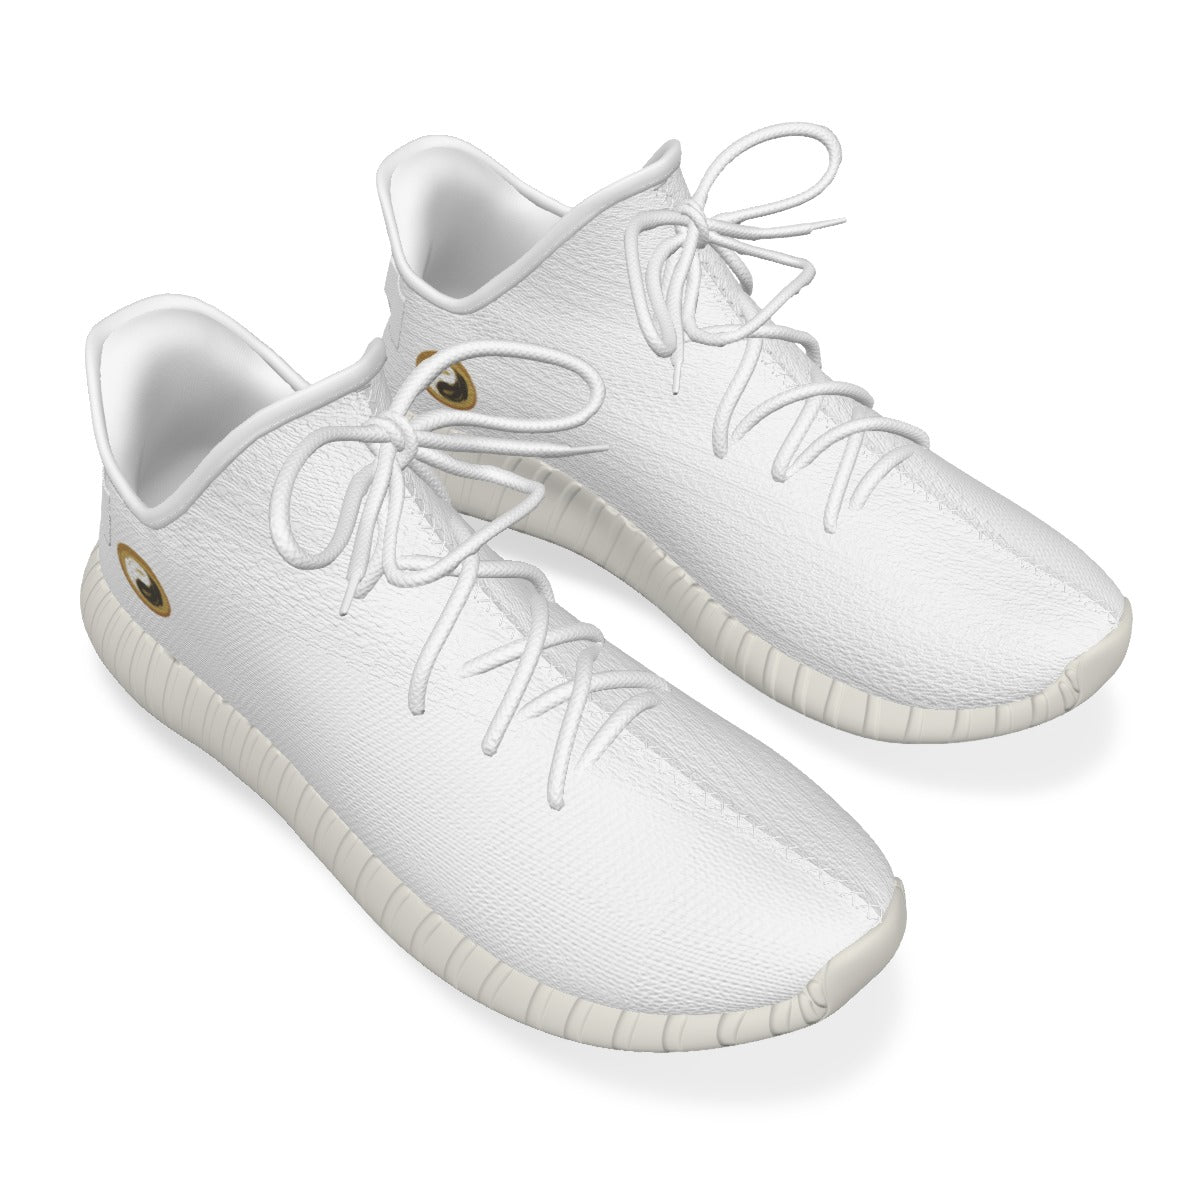 Men's Coconut White Yoga Shoes Yoga and Meditation Products - Personal Hour